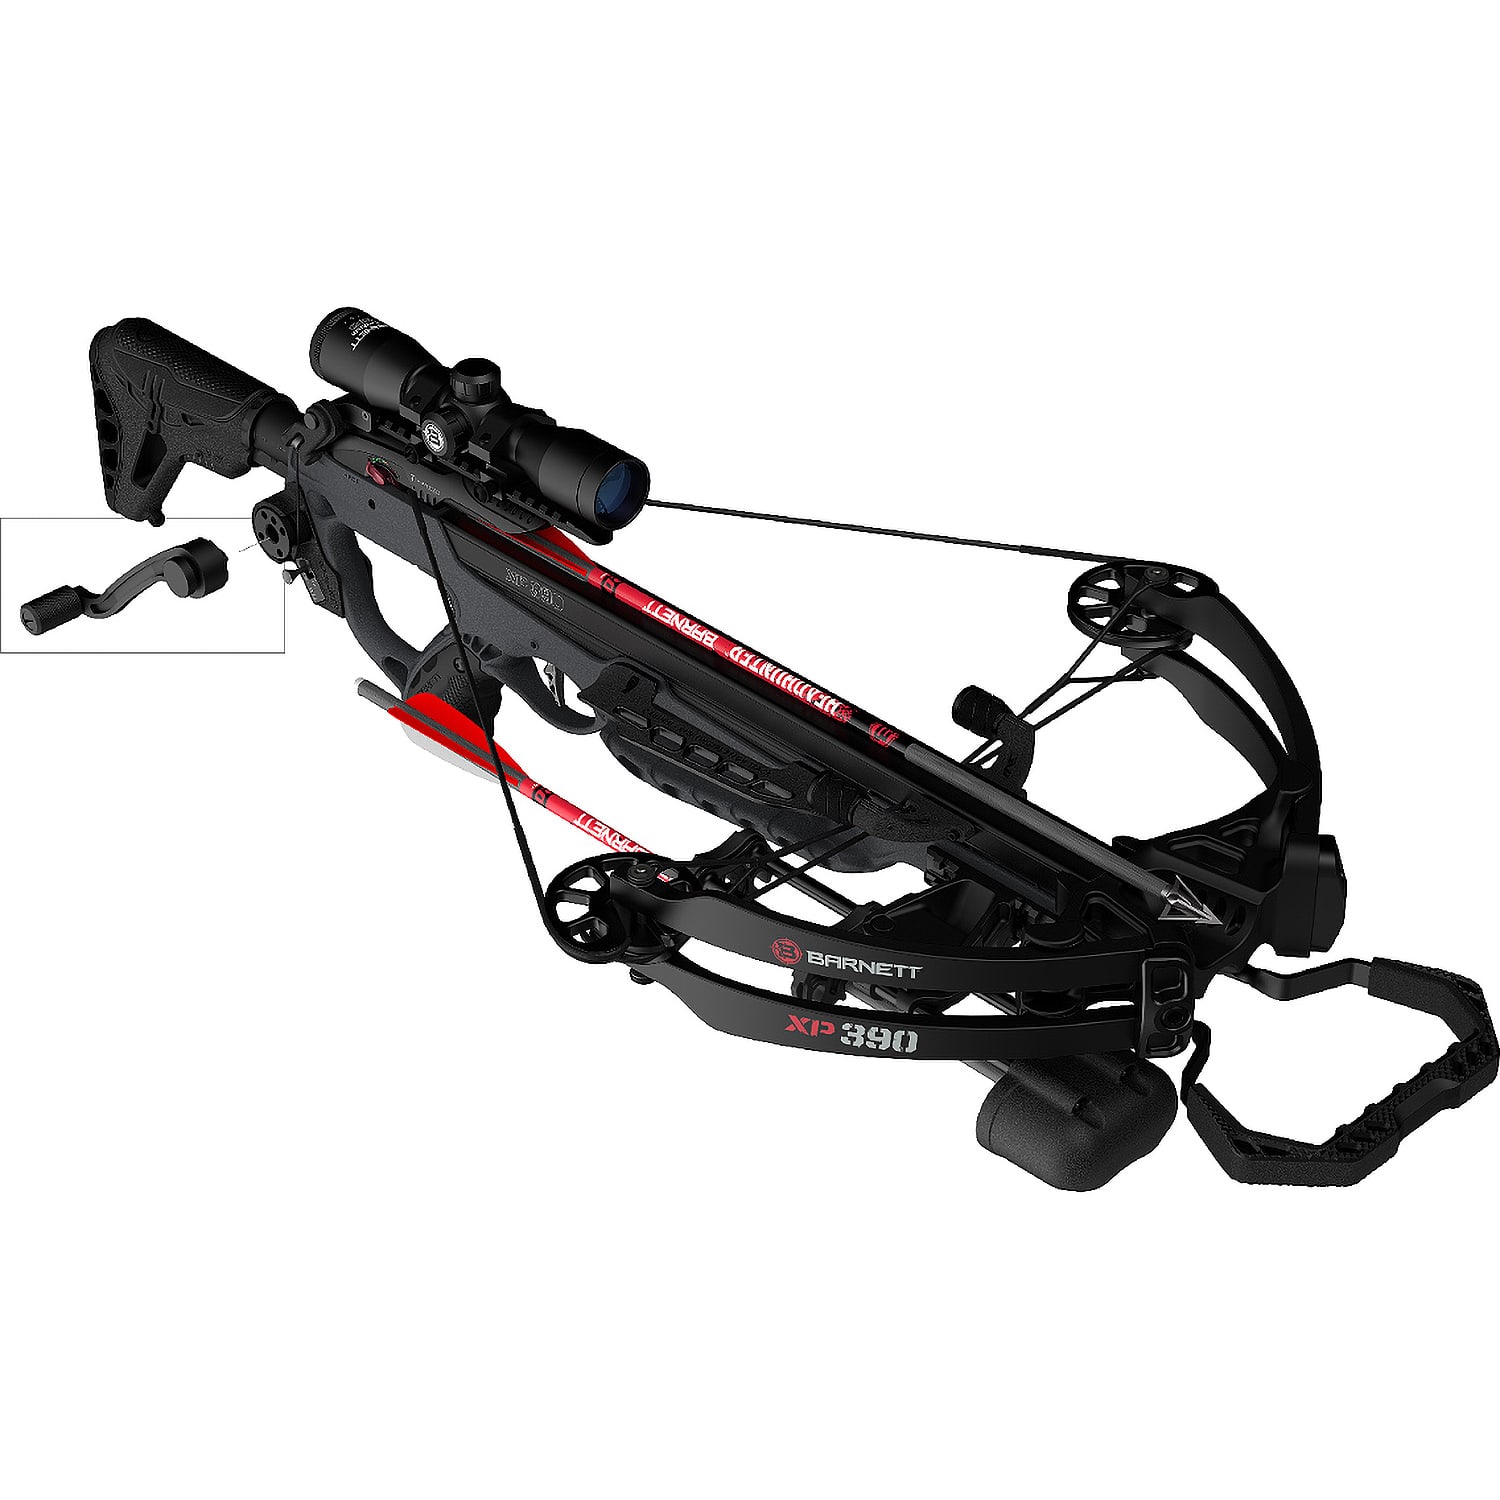 Crossbow: Best Cross bows For Sale In Canada - For Targets & Hunting